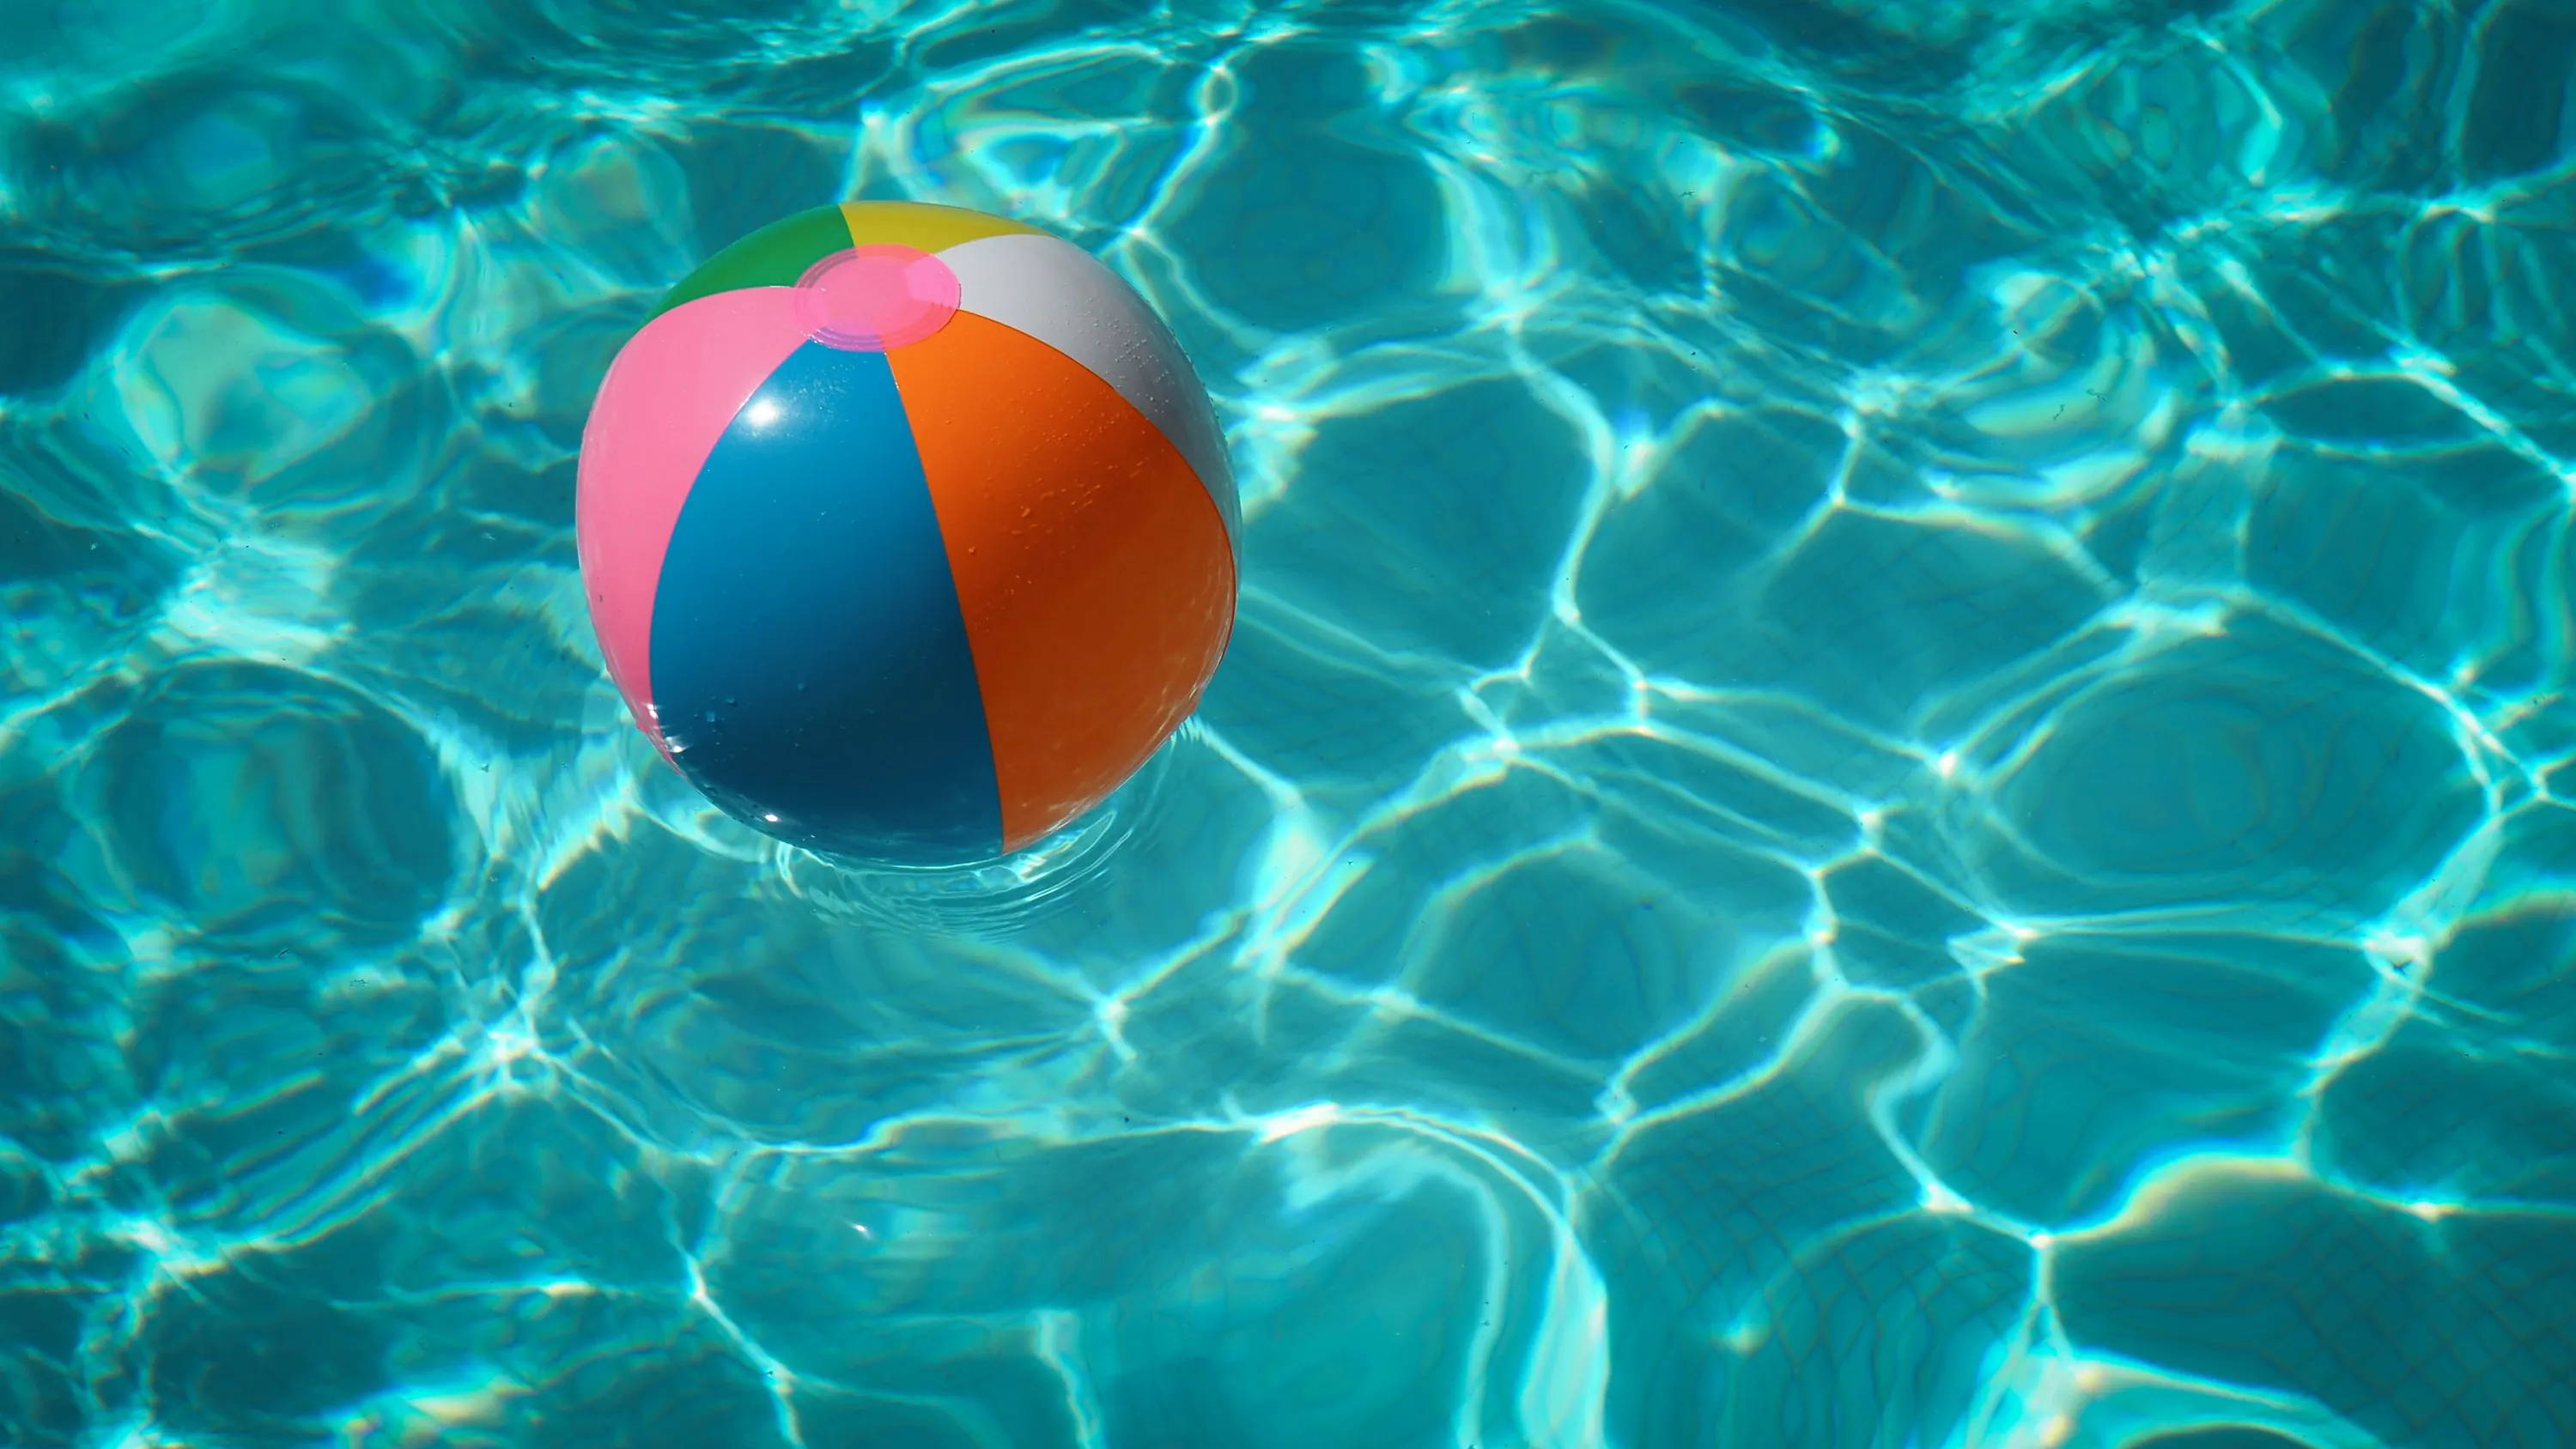 Blow up ball in pool during summer.